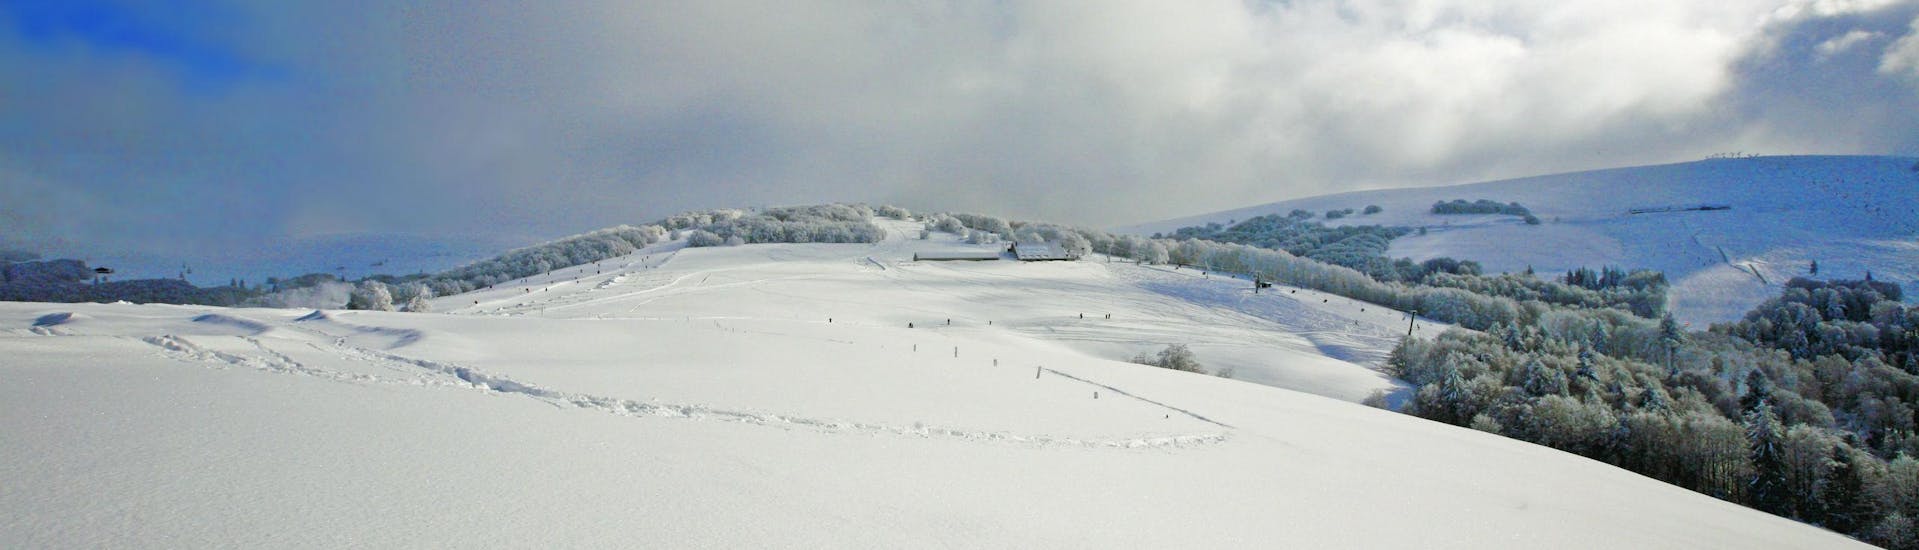 An image of the snow-covered hills in the French ski resort of La Bresse, where local ski schools offer a selection of ski lessons.